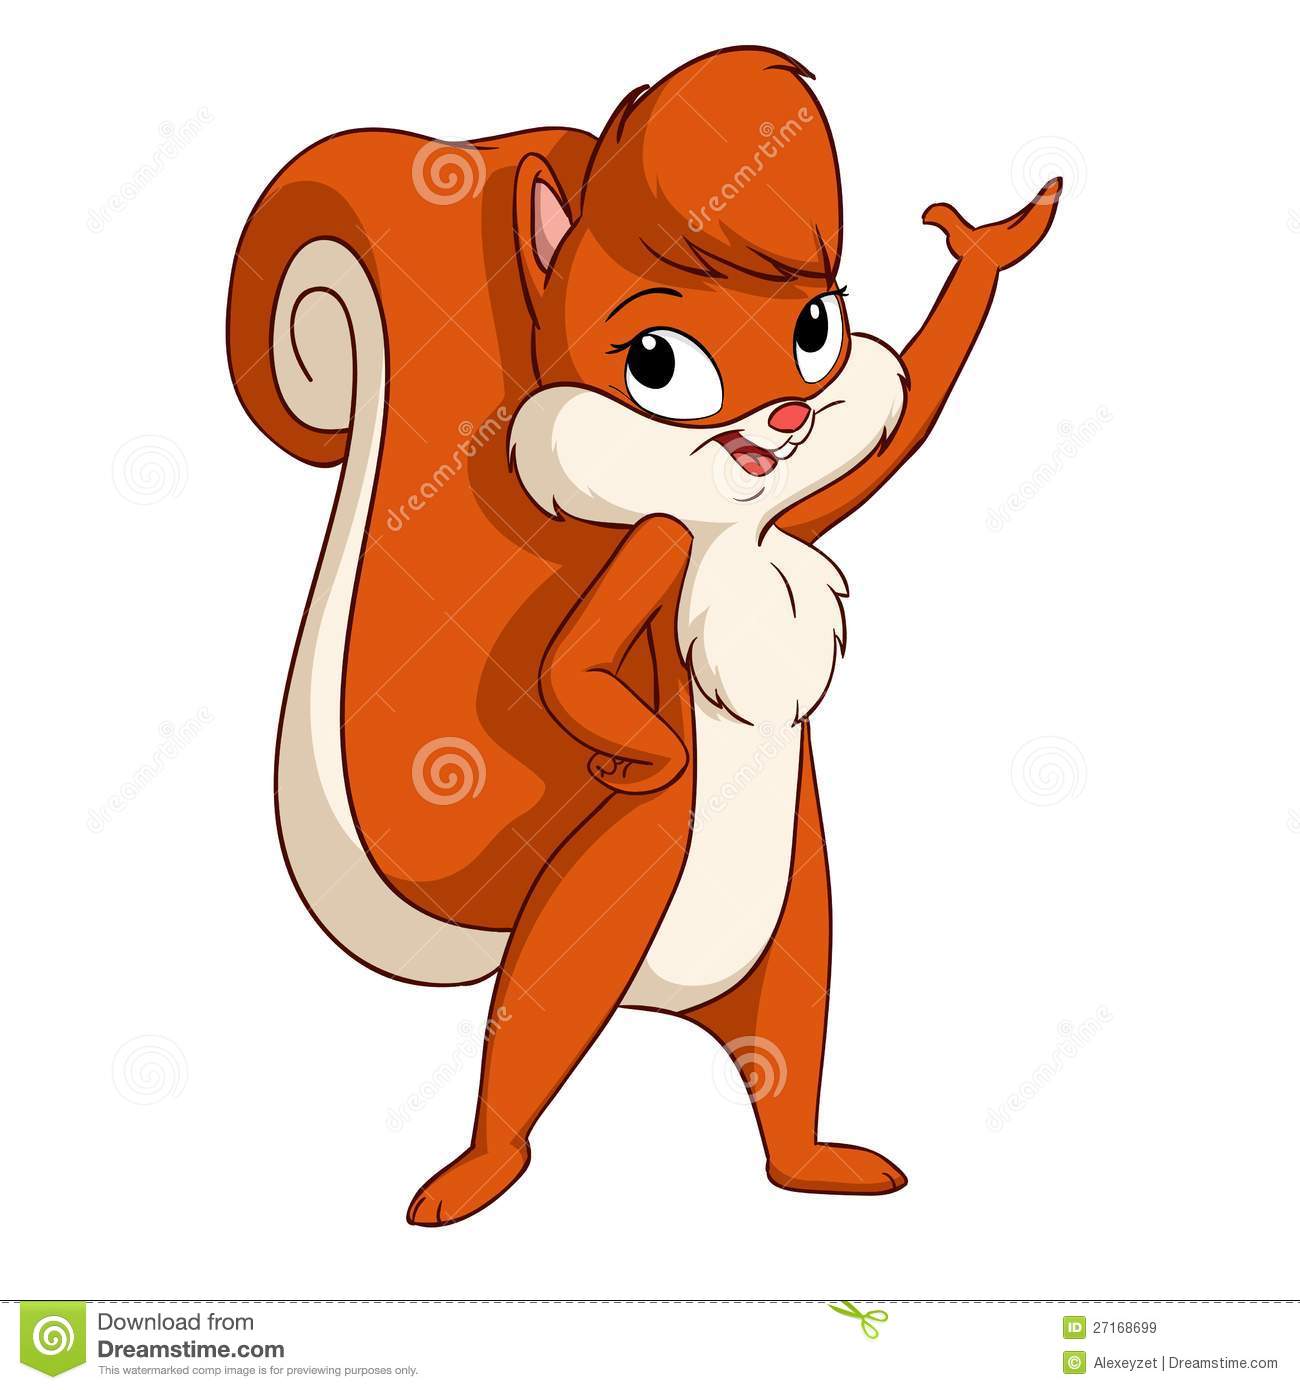 Cute Cartoon Squirrel Girl Greeting Pose Royalty Free Stock Images